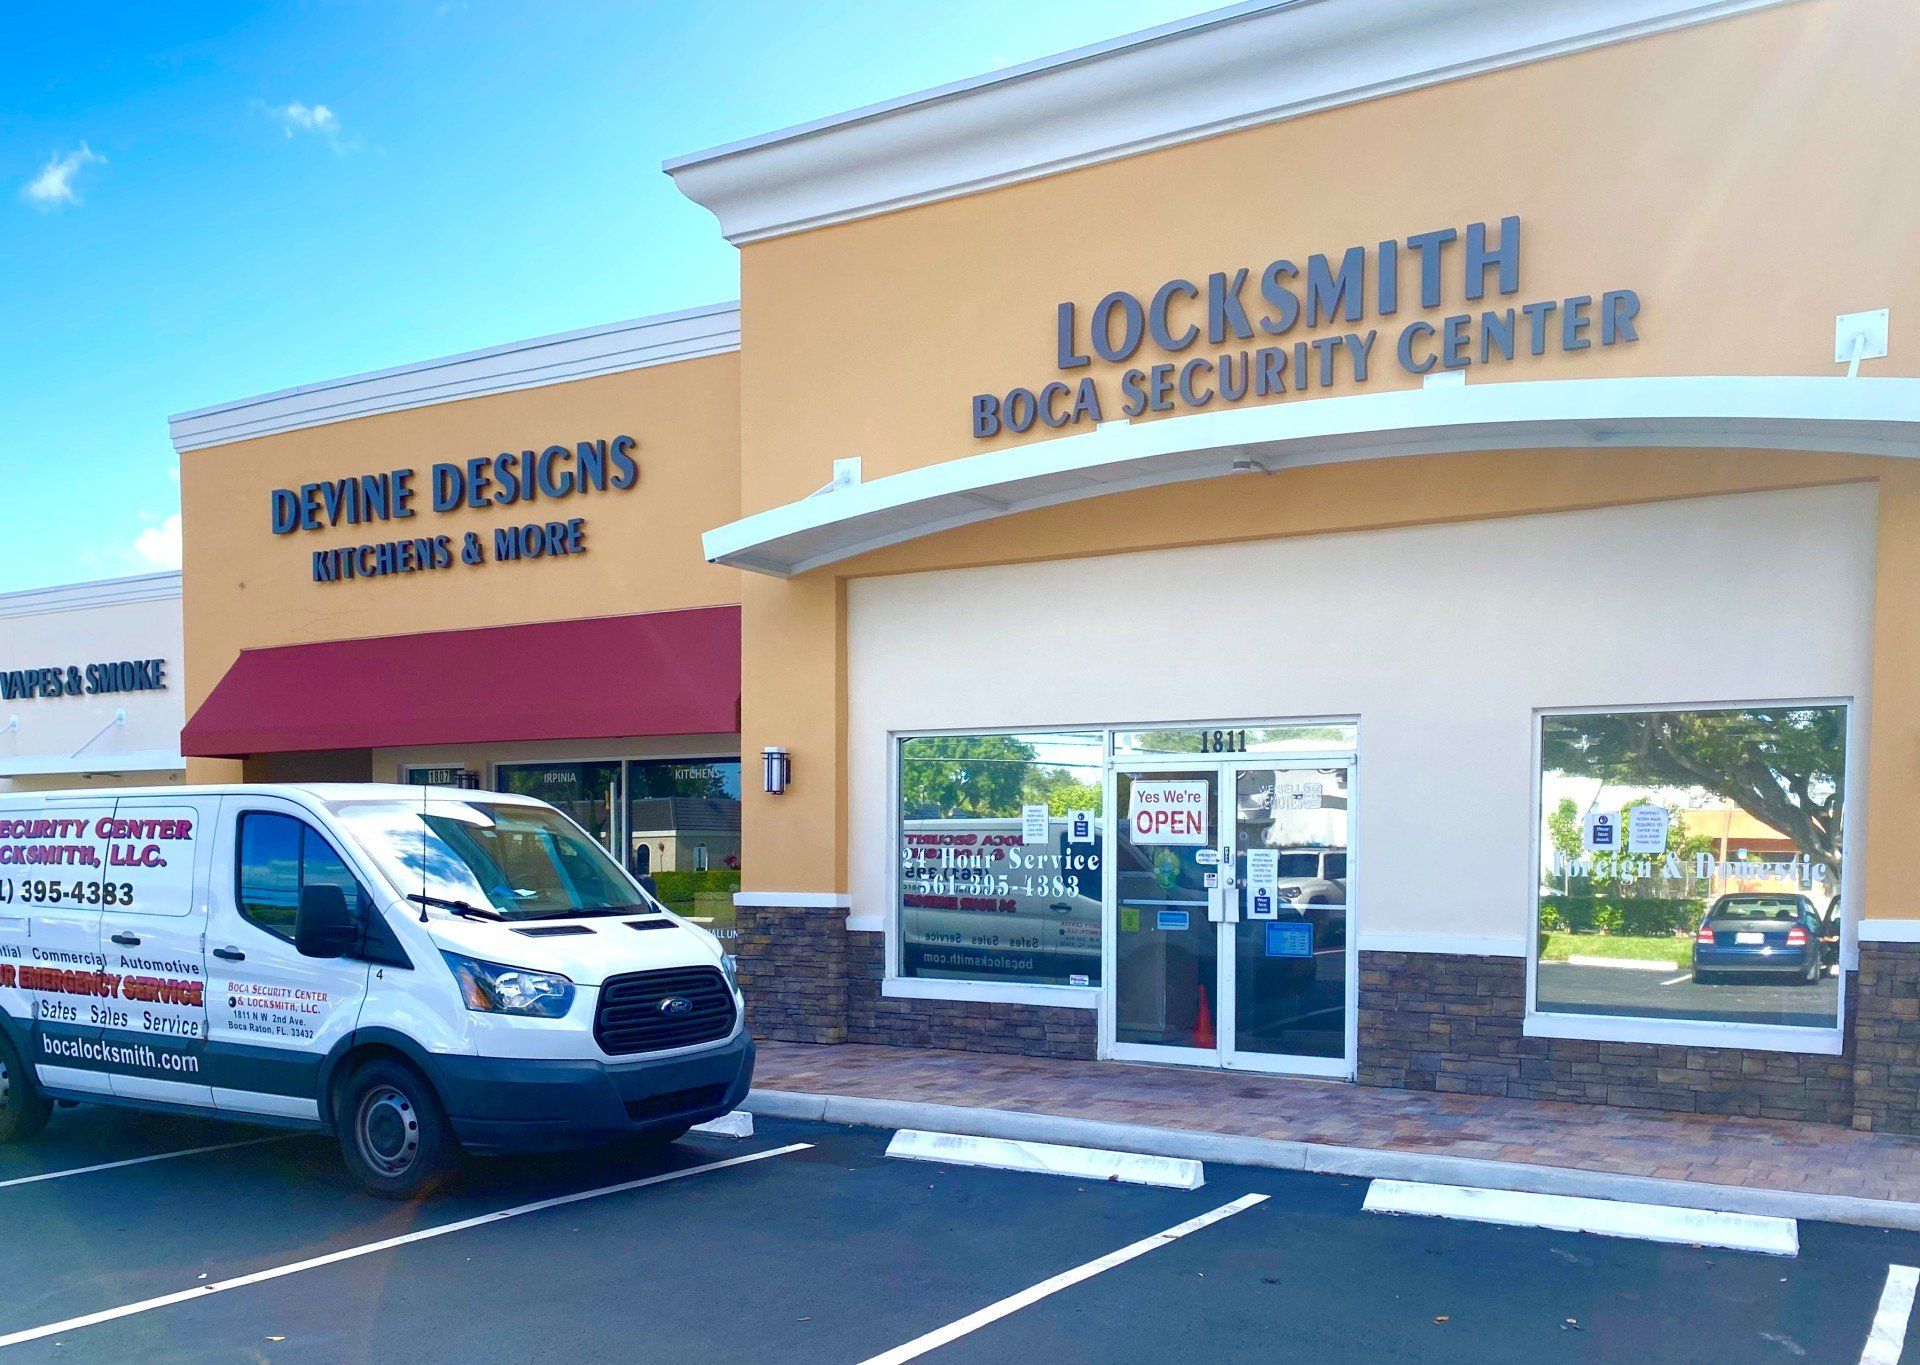 Reliable Security Center and Locksmith Services — Boca Raton, FL — Boca Security Center & Locksmith